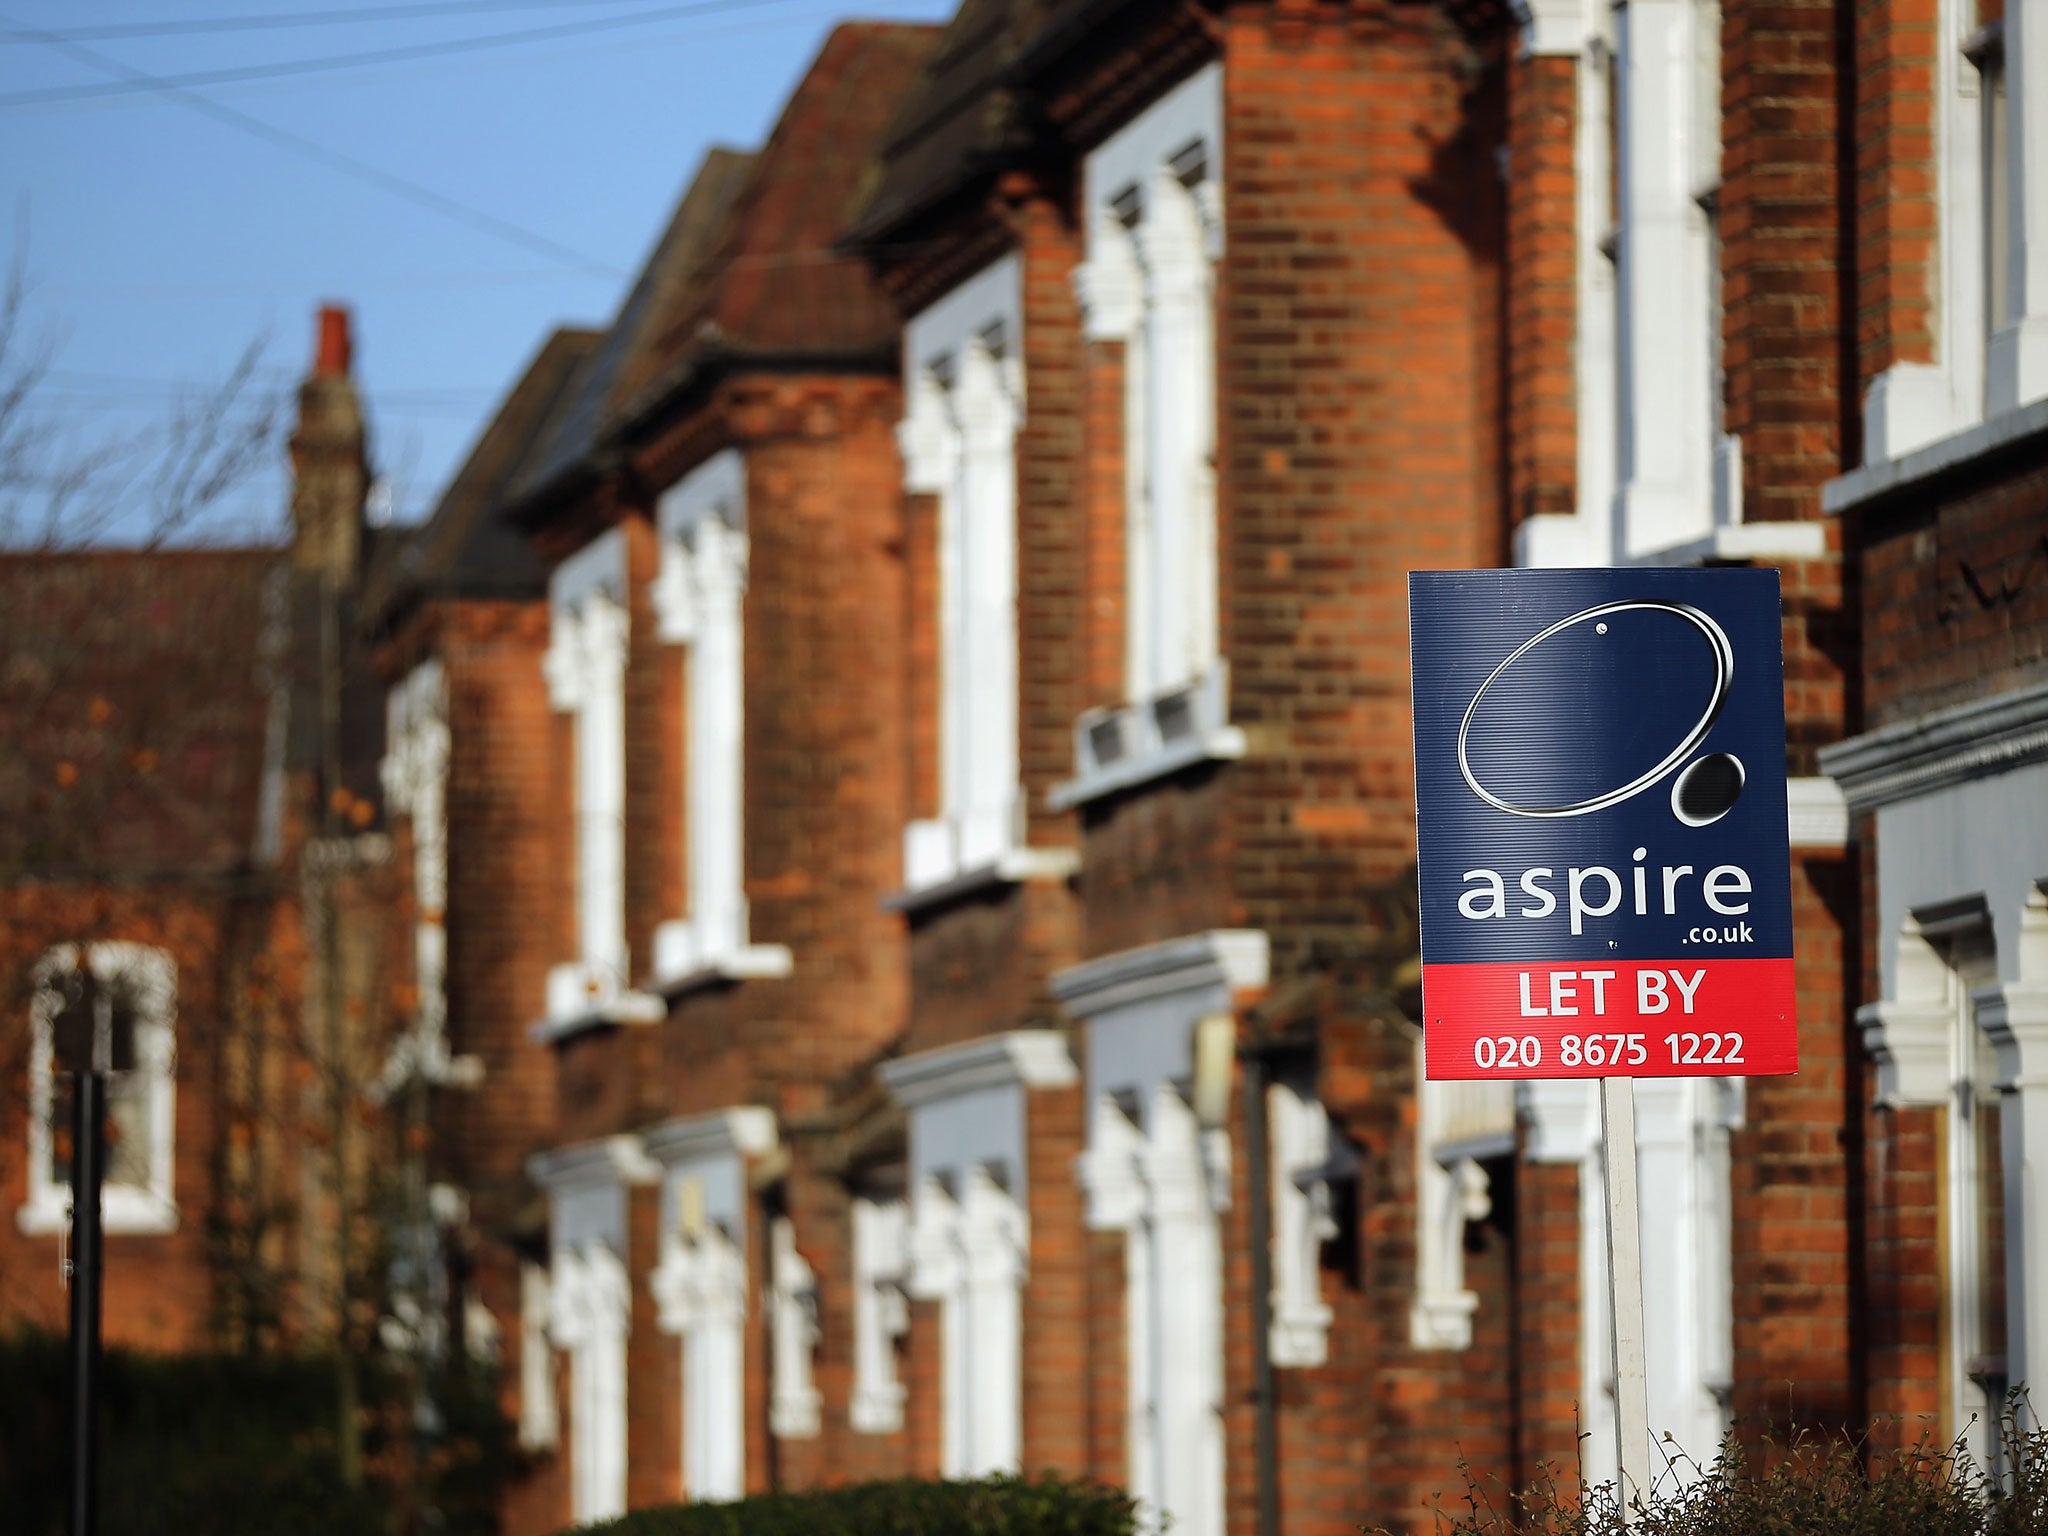 A general view of a To Let sign next to property near Clapham in London, England